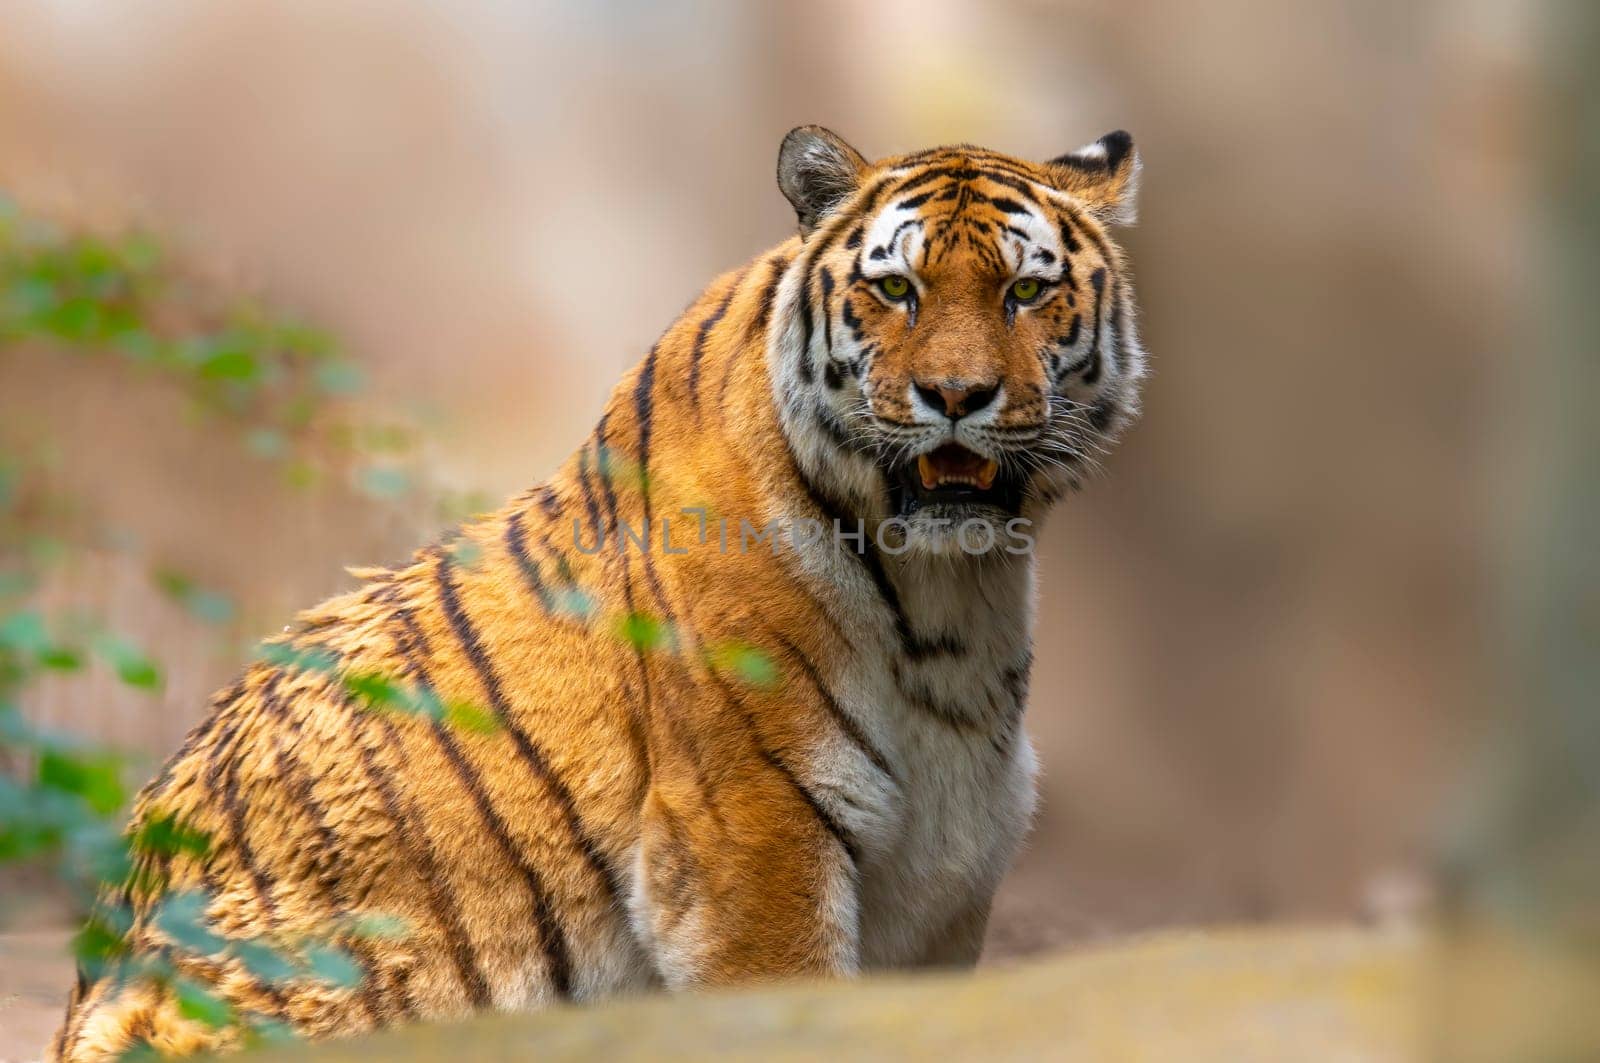 one handsome young tiger looks at the camera leisurely by mario_plechaty_photography